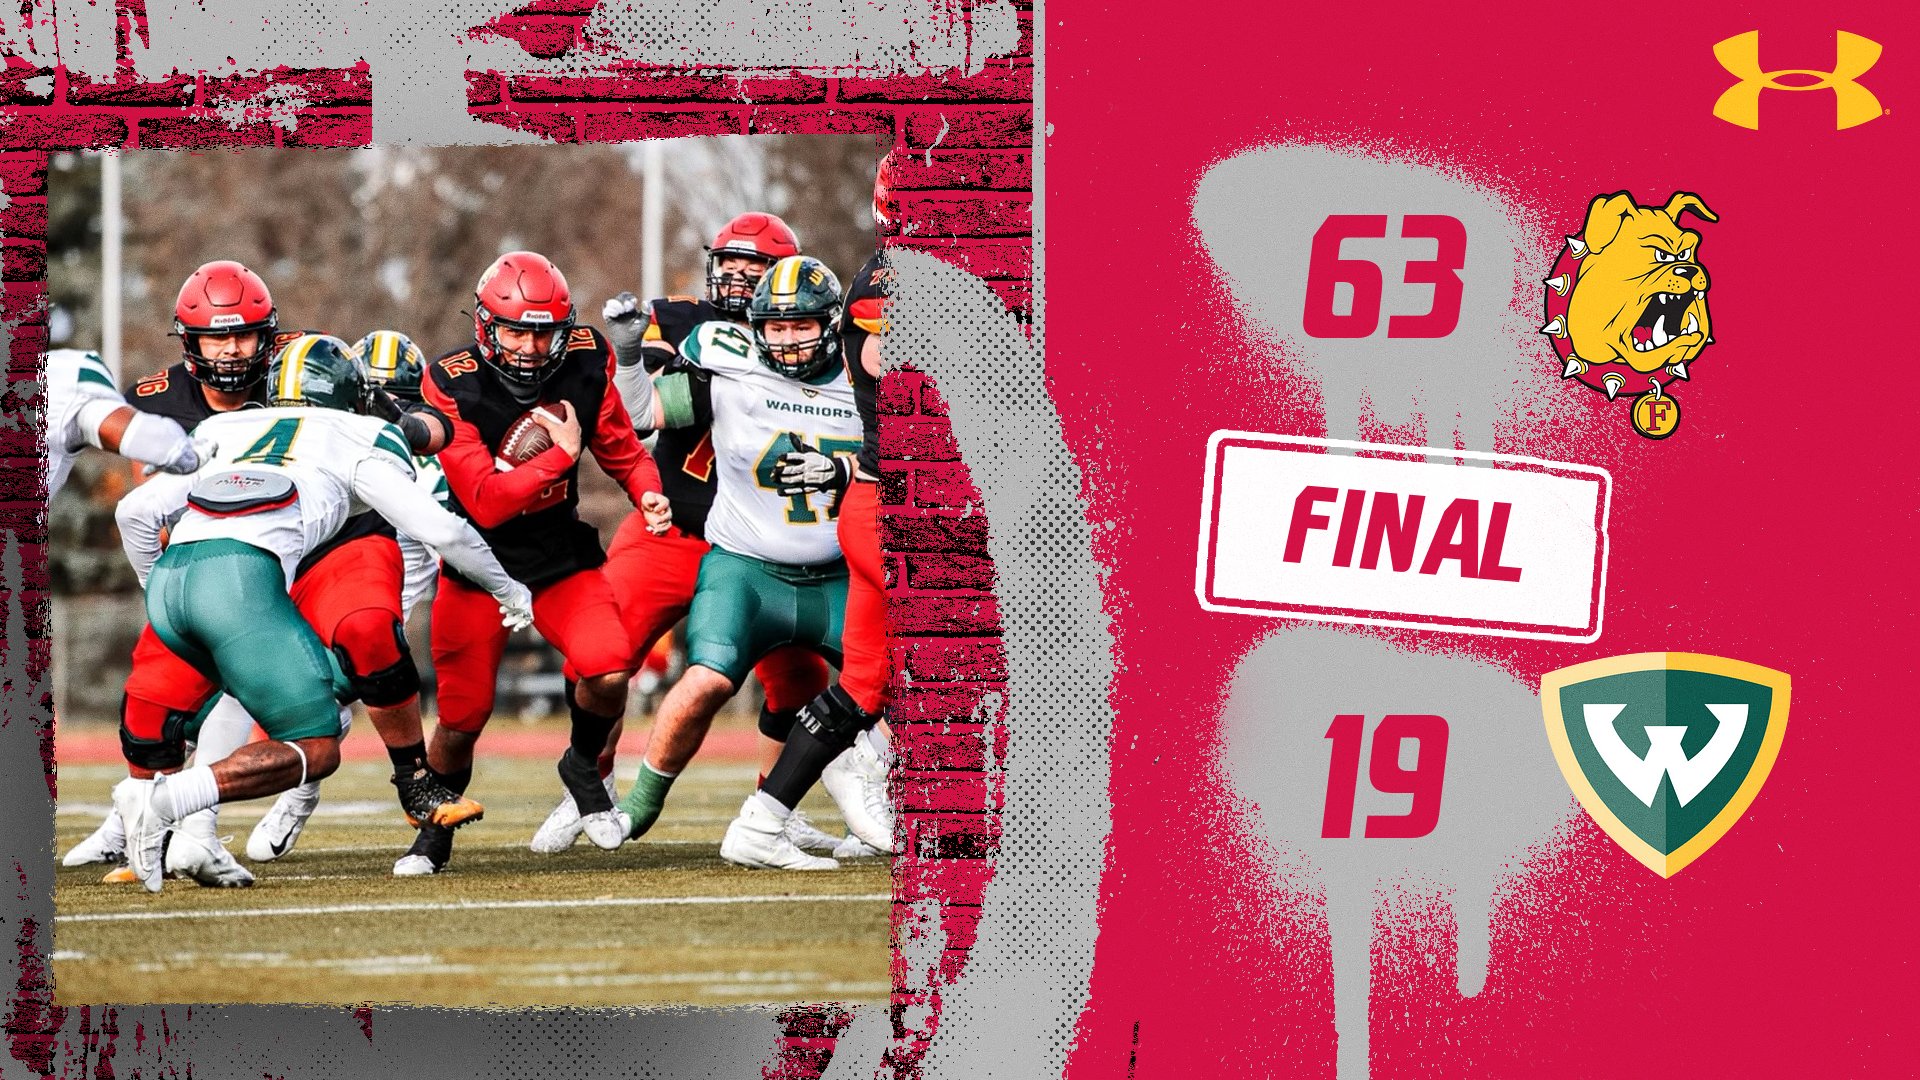 Ferris State Football Closes Out Regular Season With Big Senior Day Victory